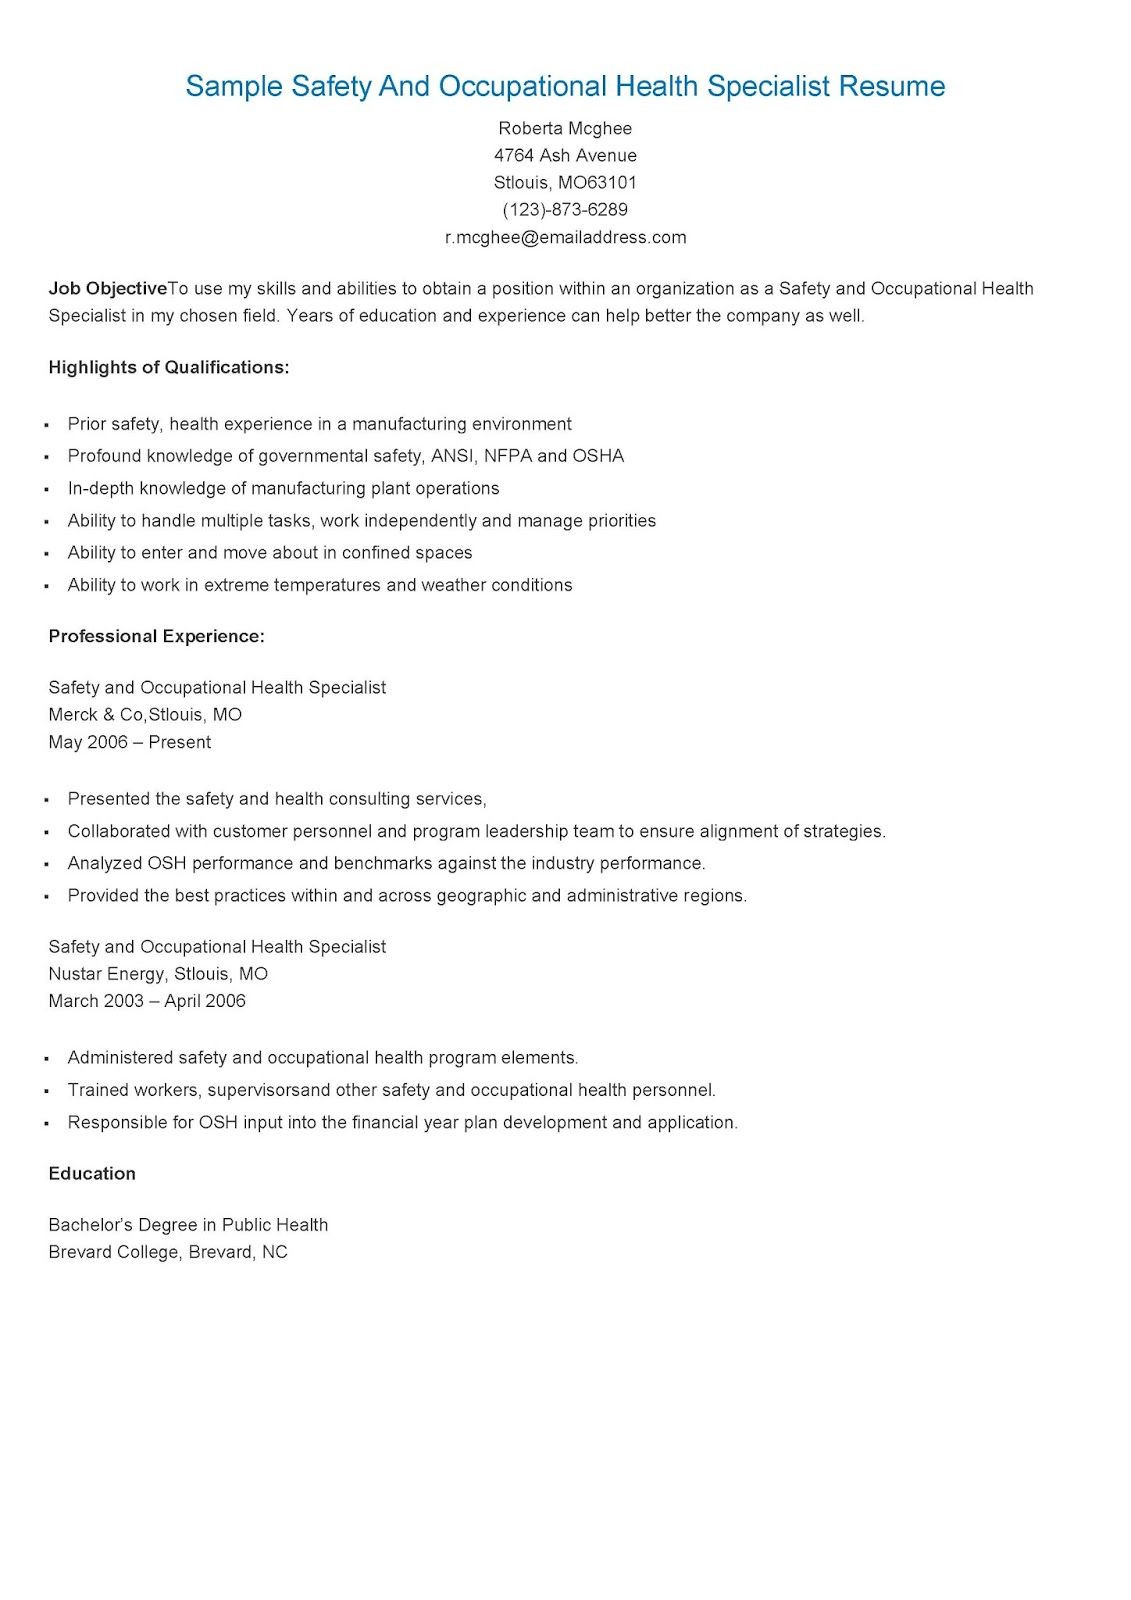 Sample Resume for New Occupational Health and Safety Sample Safety and Occupational Health Specialist Resume Sample …